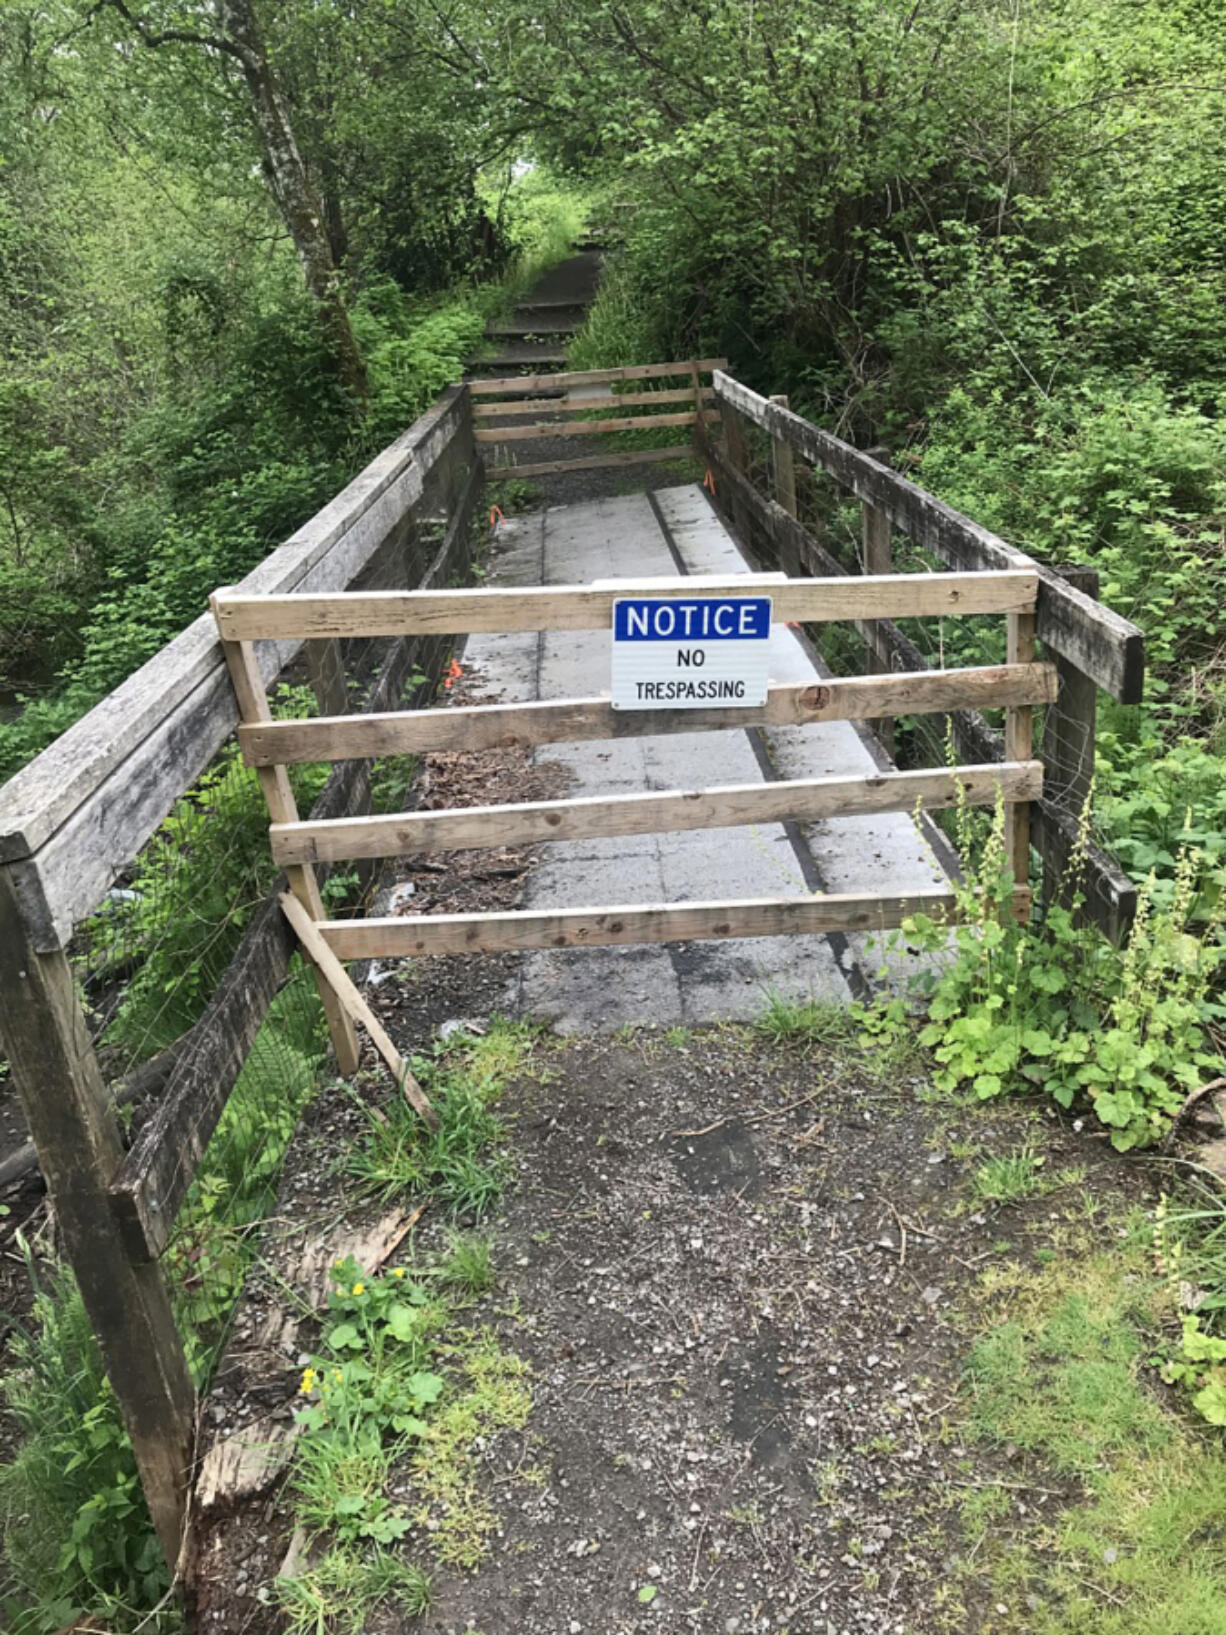 The city of Washougal is moving ahead with a project to replace a pedestrian bridge at Hartwood Park despite the higher-than-originally-estimated cost of $339,000 that prompted some city council members to question if they should consider delaying or abandoning the project altogether.